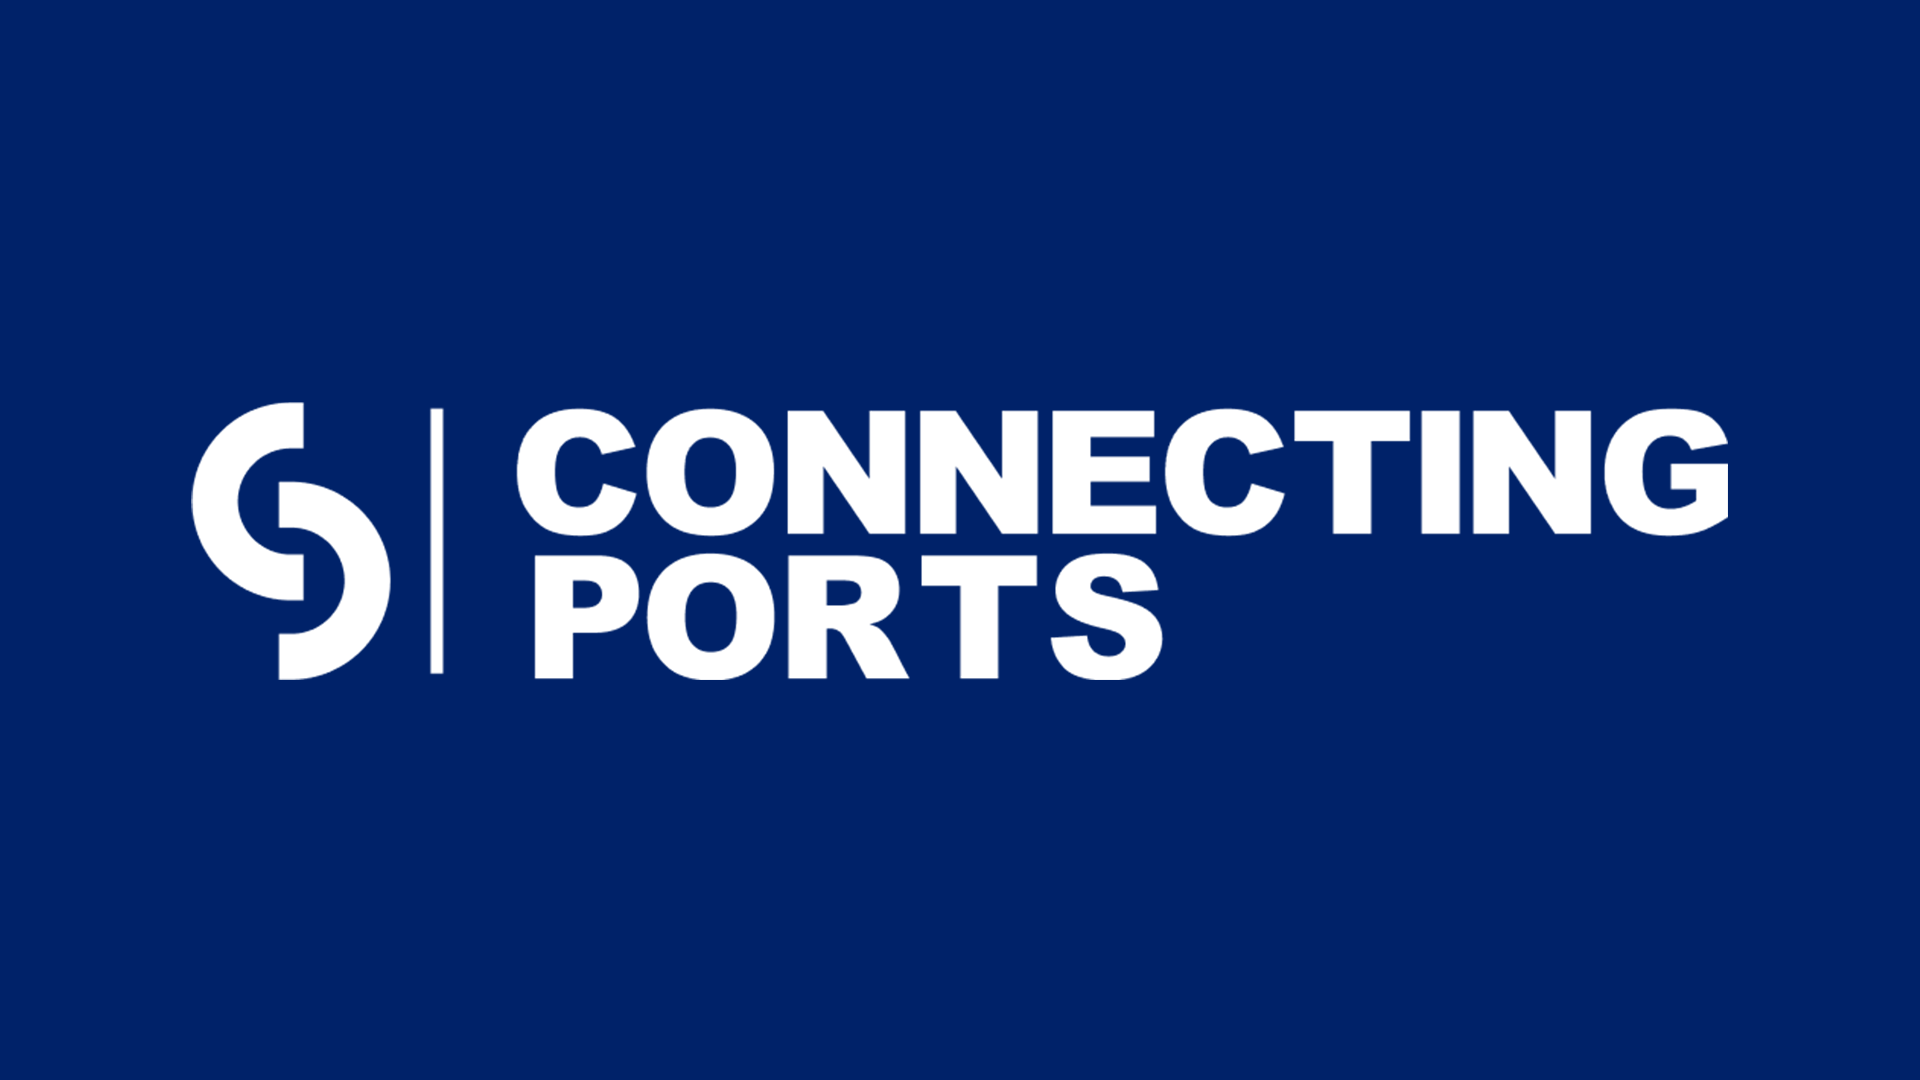 Connecting Ports - Session #03